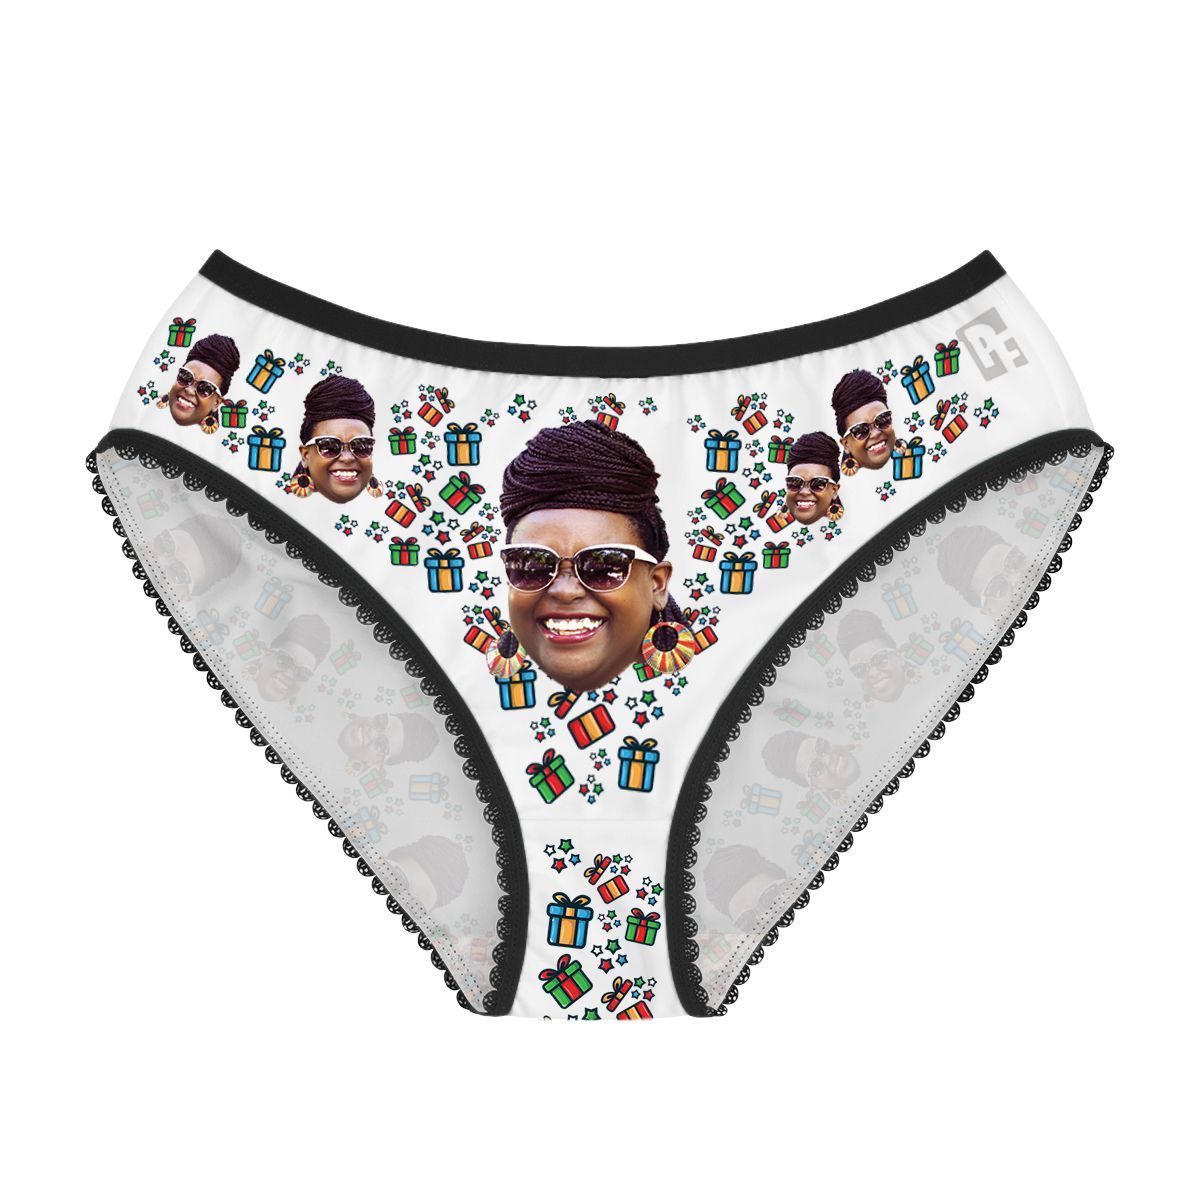 White Gift Box women's underwear briefs personalized with photo printed on them